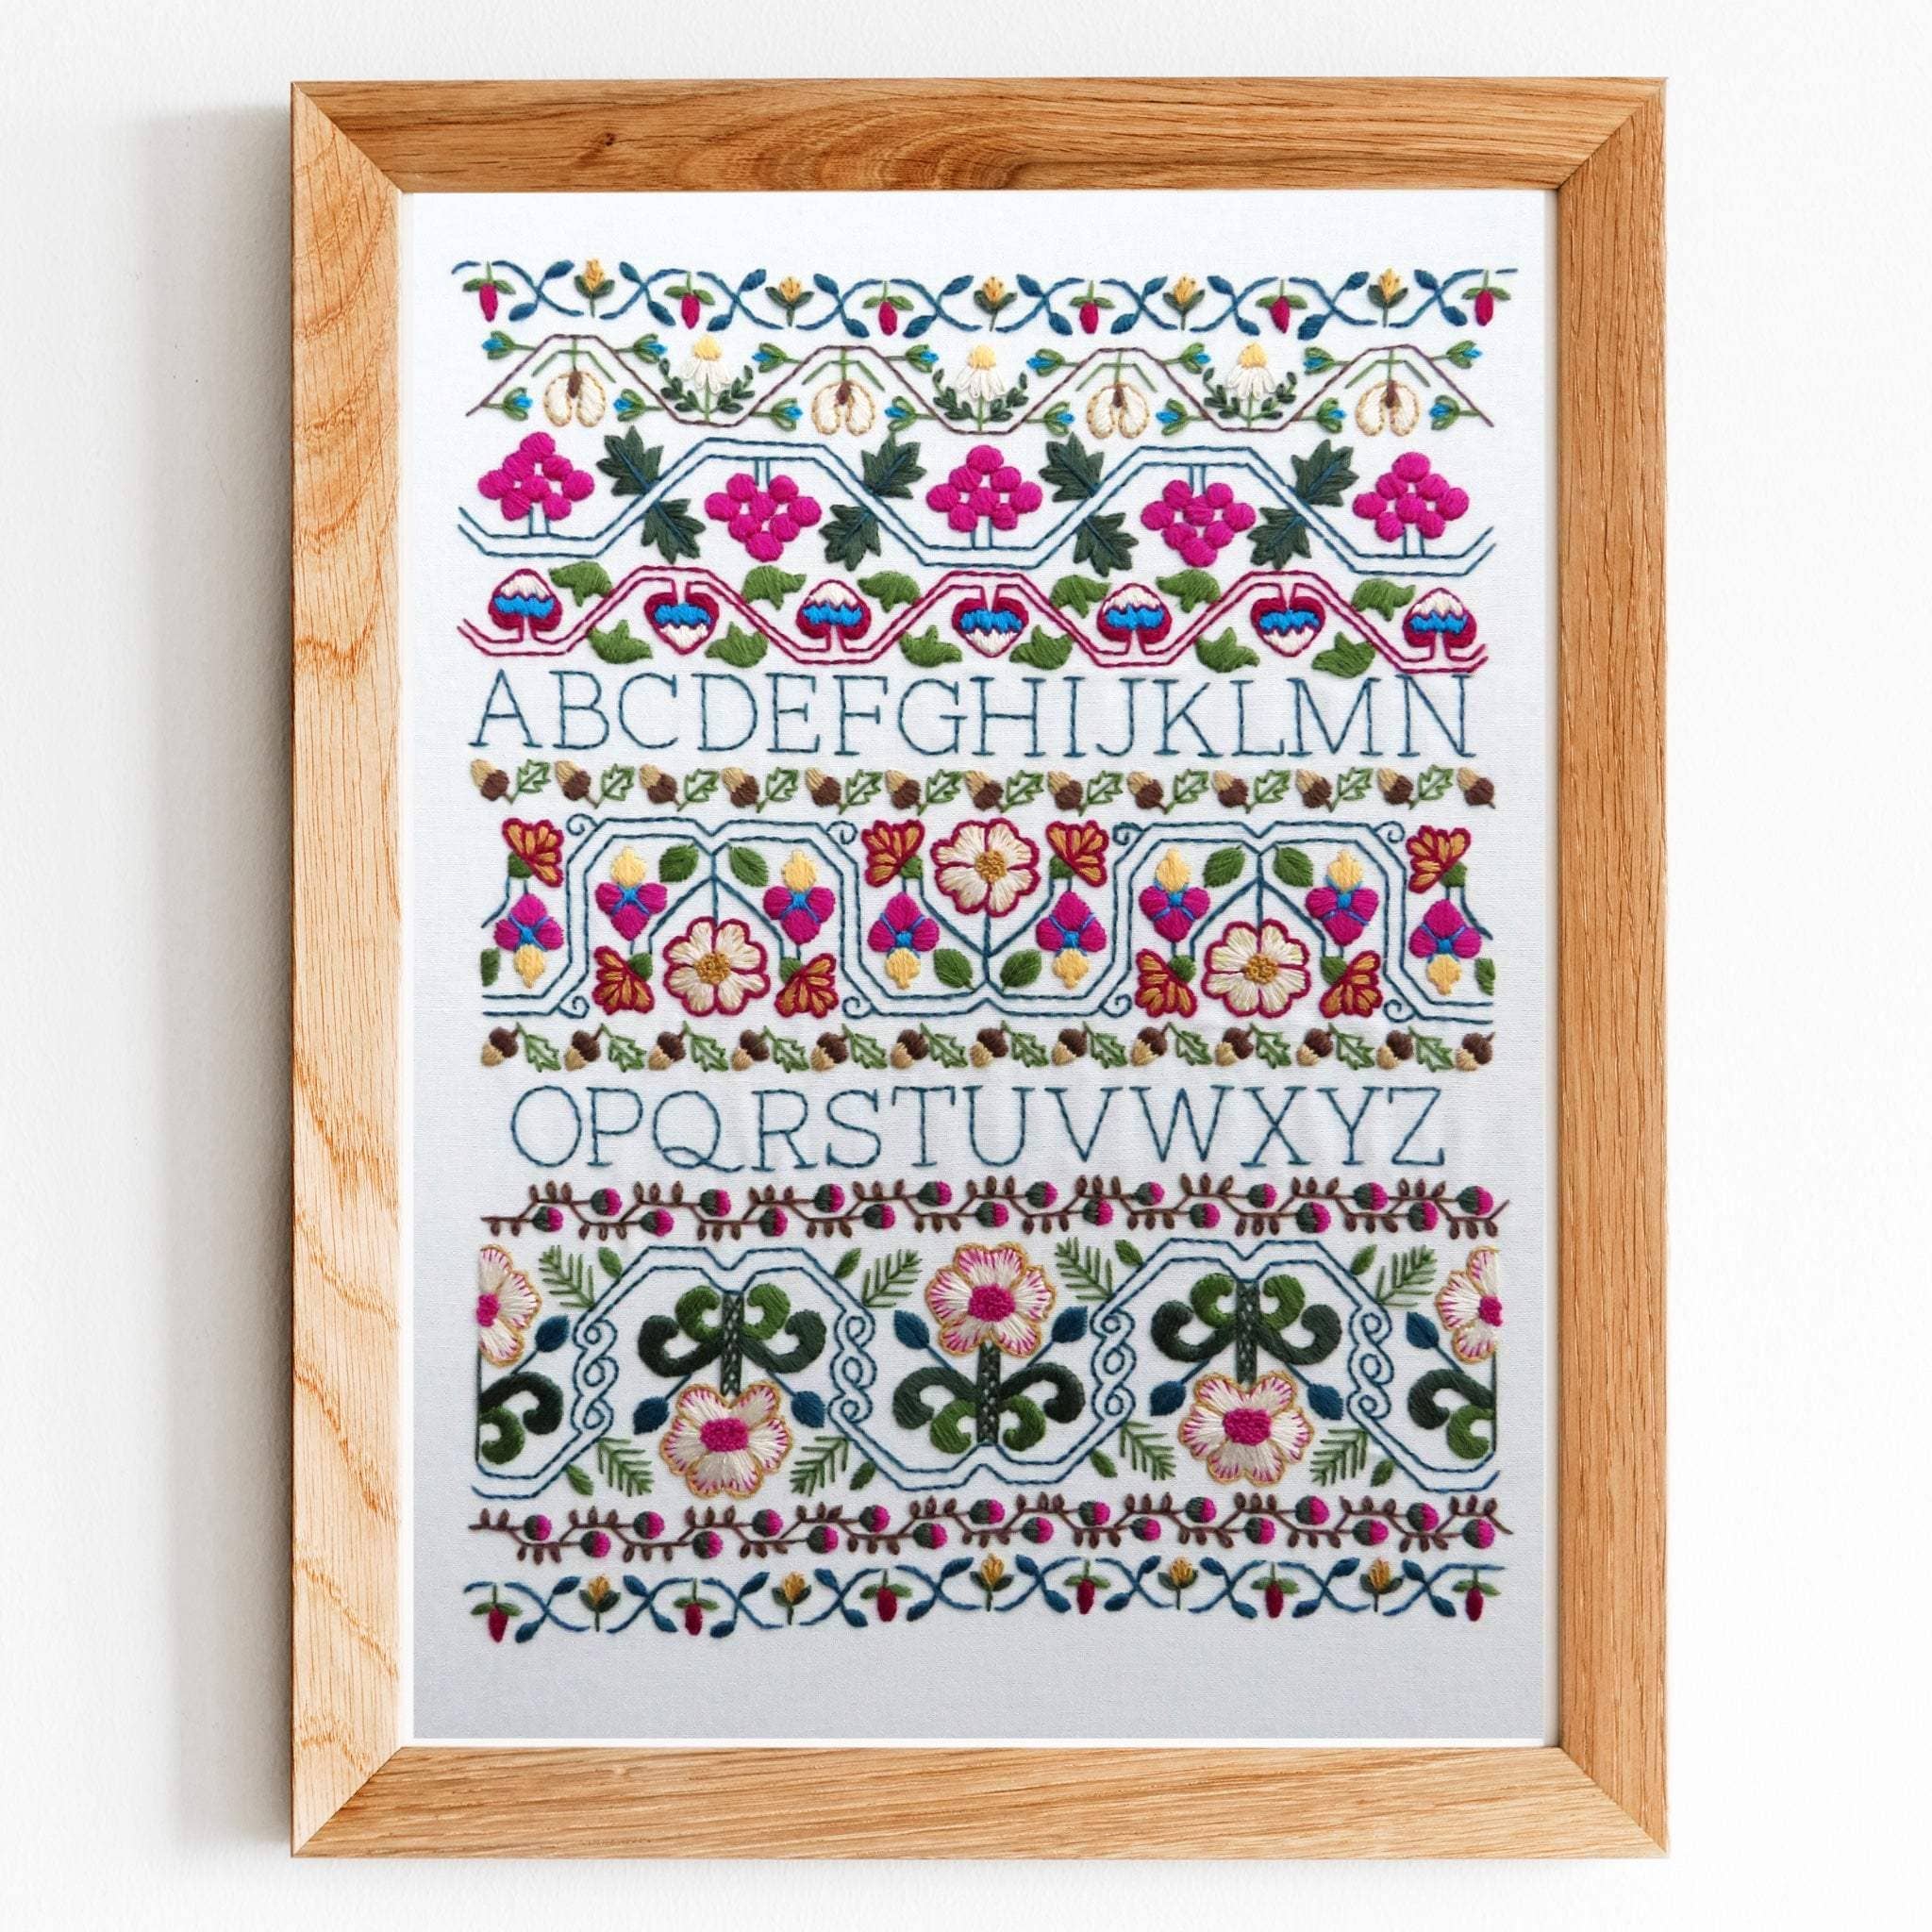 18th Century Sampler, Pre Printed Embroidery Fabric Pattern , Pre Printed Fabric Pattern , StitchDoodles , Embroidery, embroidery hoop, embroidery hoop kit, Embroidery Kit, embroidery kit for adults, embroidery kit fro beginners, embroidery pattern, hand embroidery, hand embroidery fabric, hand embroidery seat frame, modern embroidery kits, nurge embroidery hoop, PDF pattern, Printed Pattern , StitchDoodles , shop.stitchdoodles.com